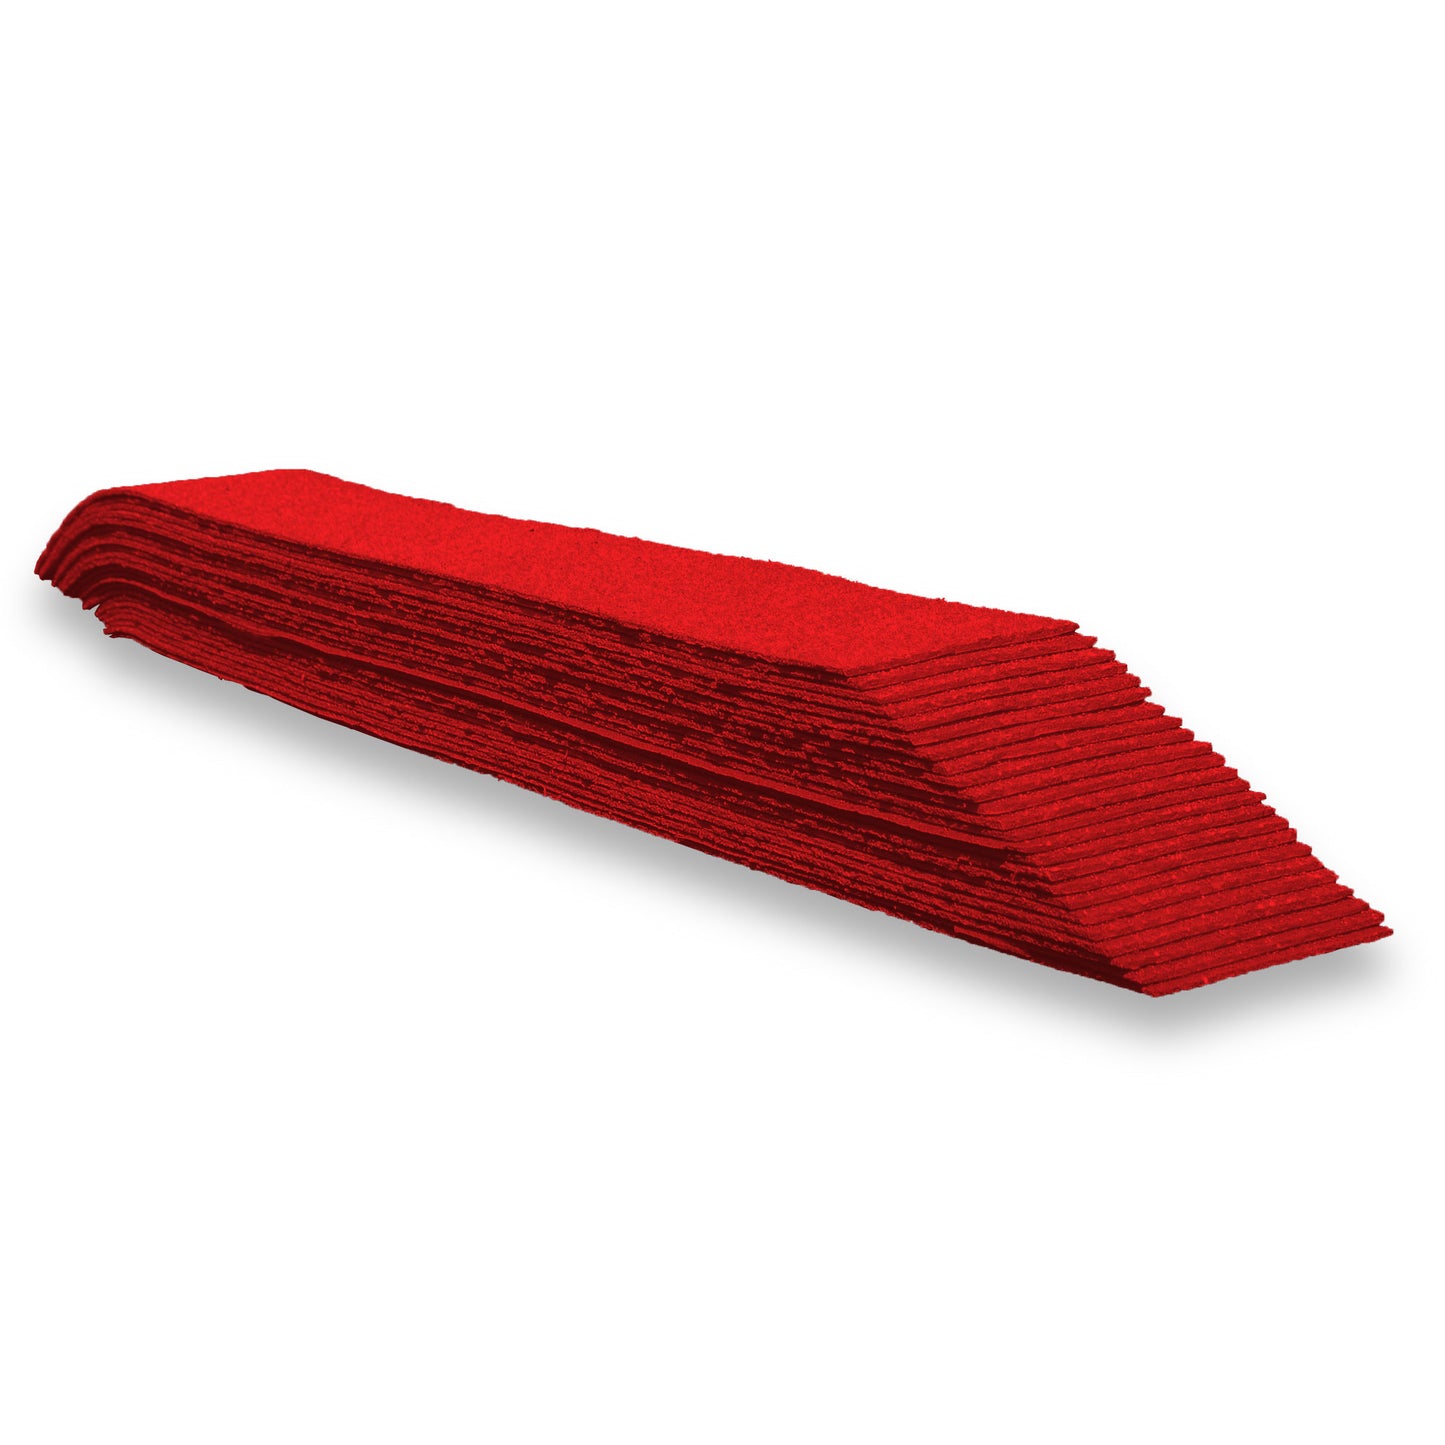 A stack of red preformed thermoplastic lines